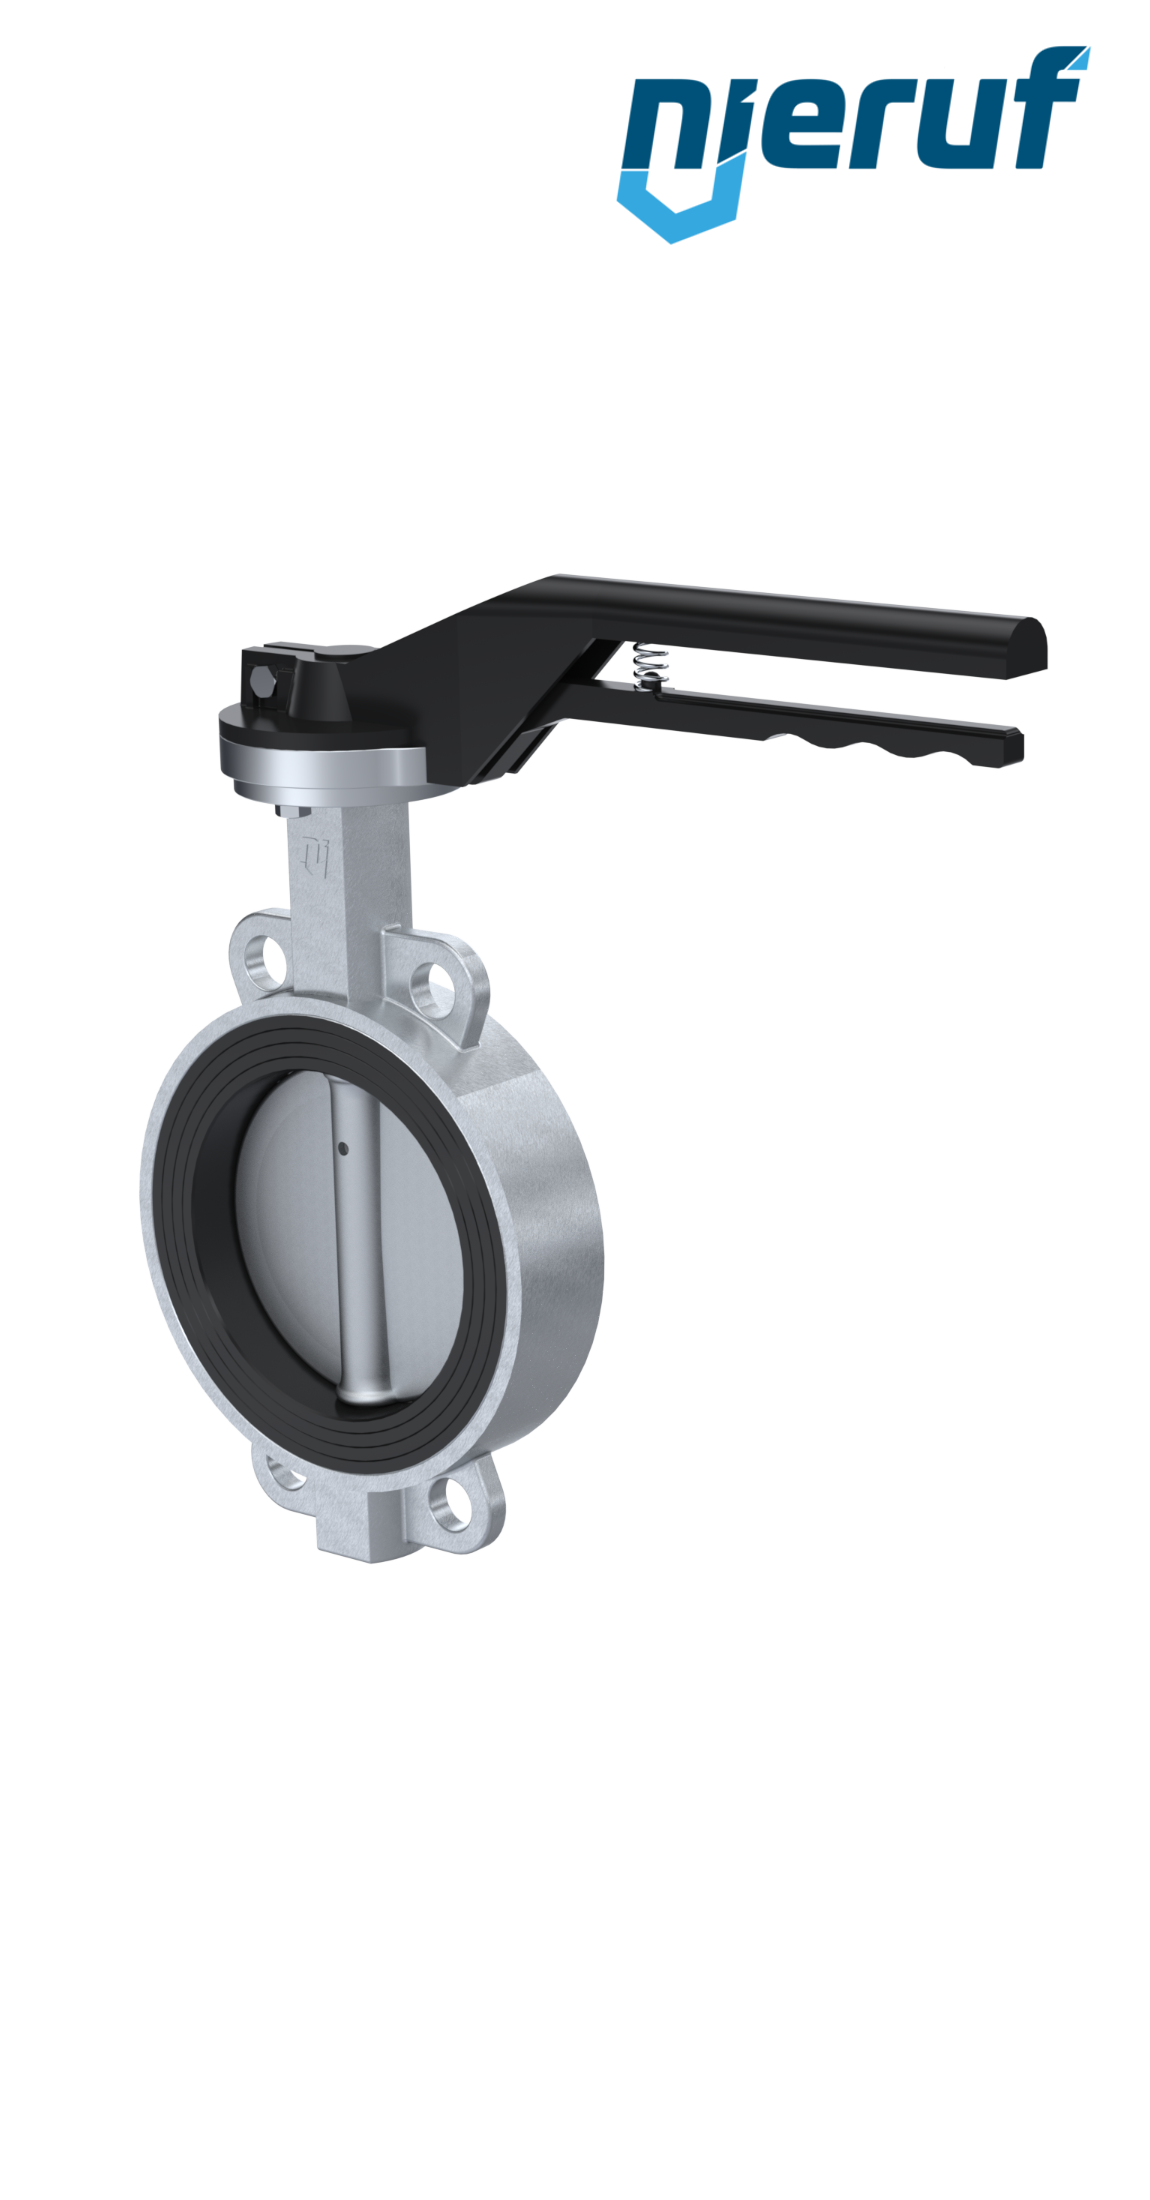 Butterfly-valve-stainless-steel DN 150 PN16 AK08 EPDM notch lever